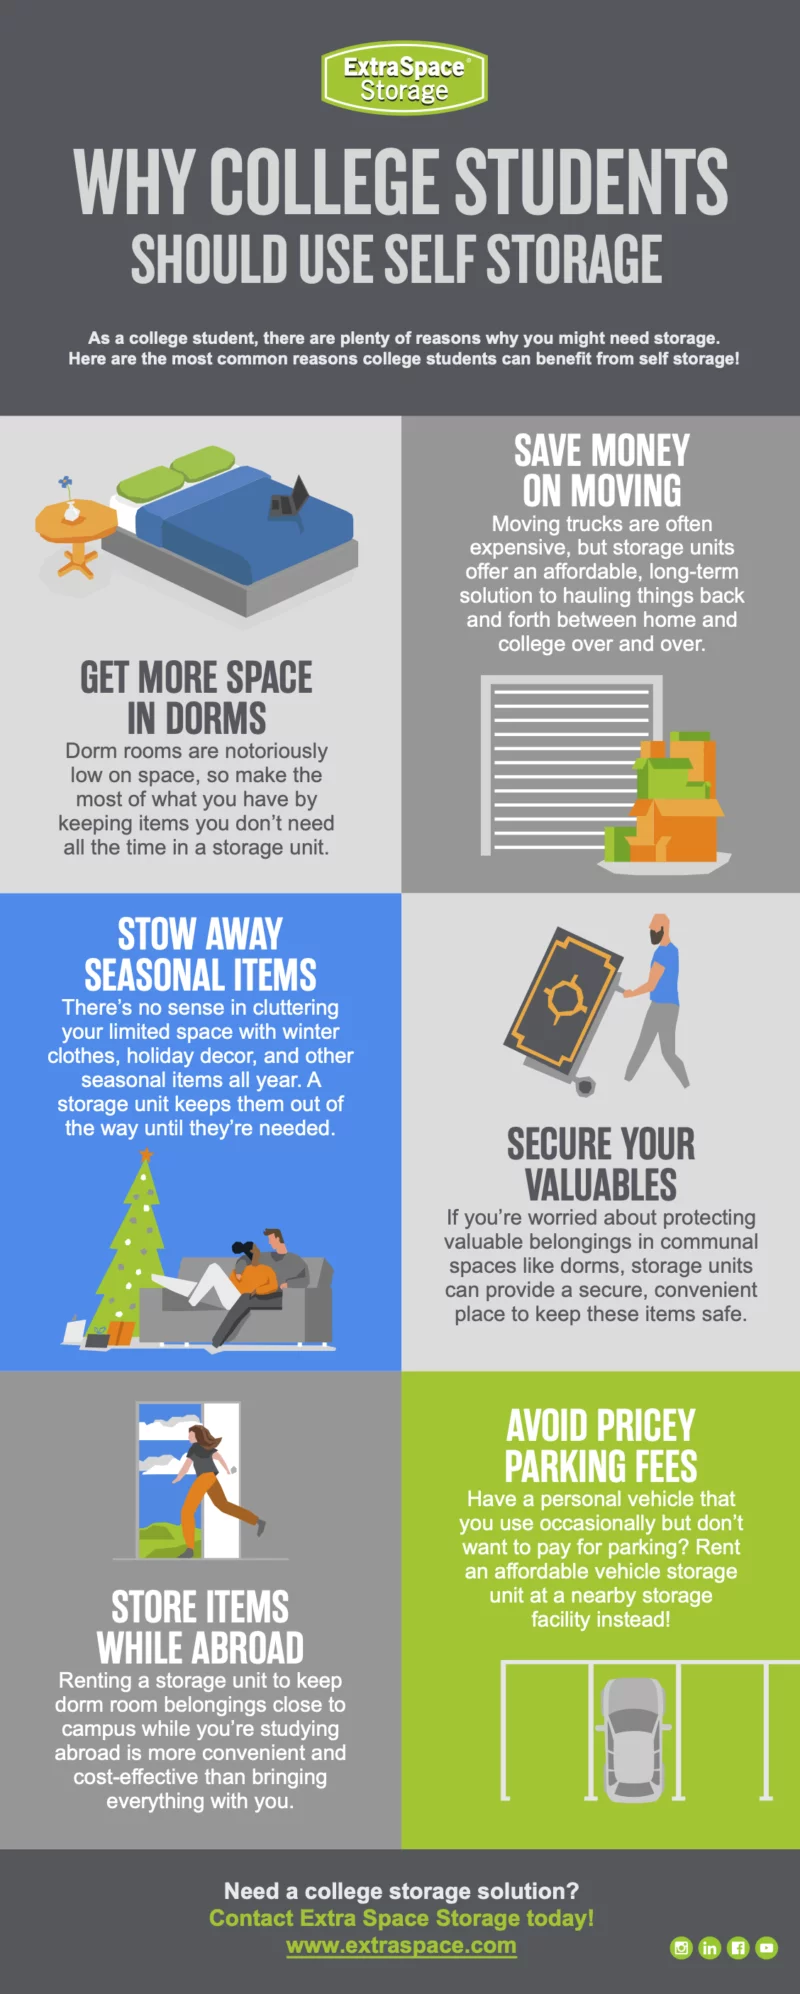 https://www.extraspace.com/blog/wp-content/uploads/2018/11/Reasons-for-Self-Storage-College-Infographic-e1611853786305.png.webp